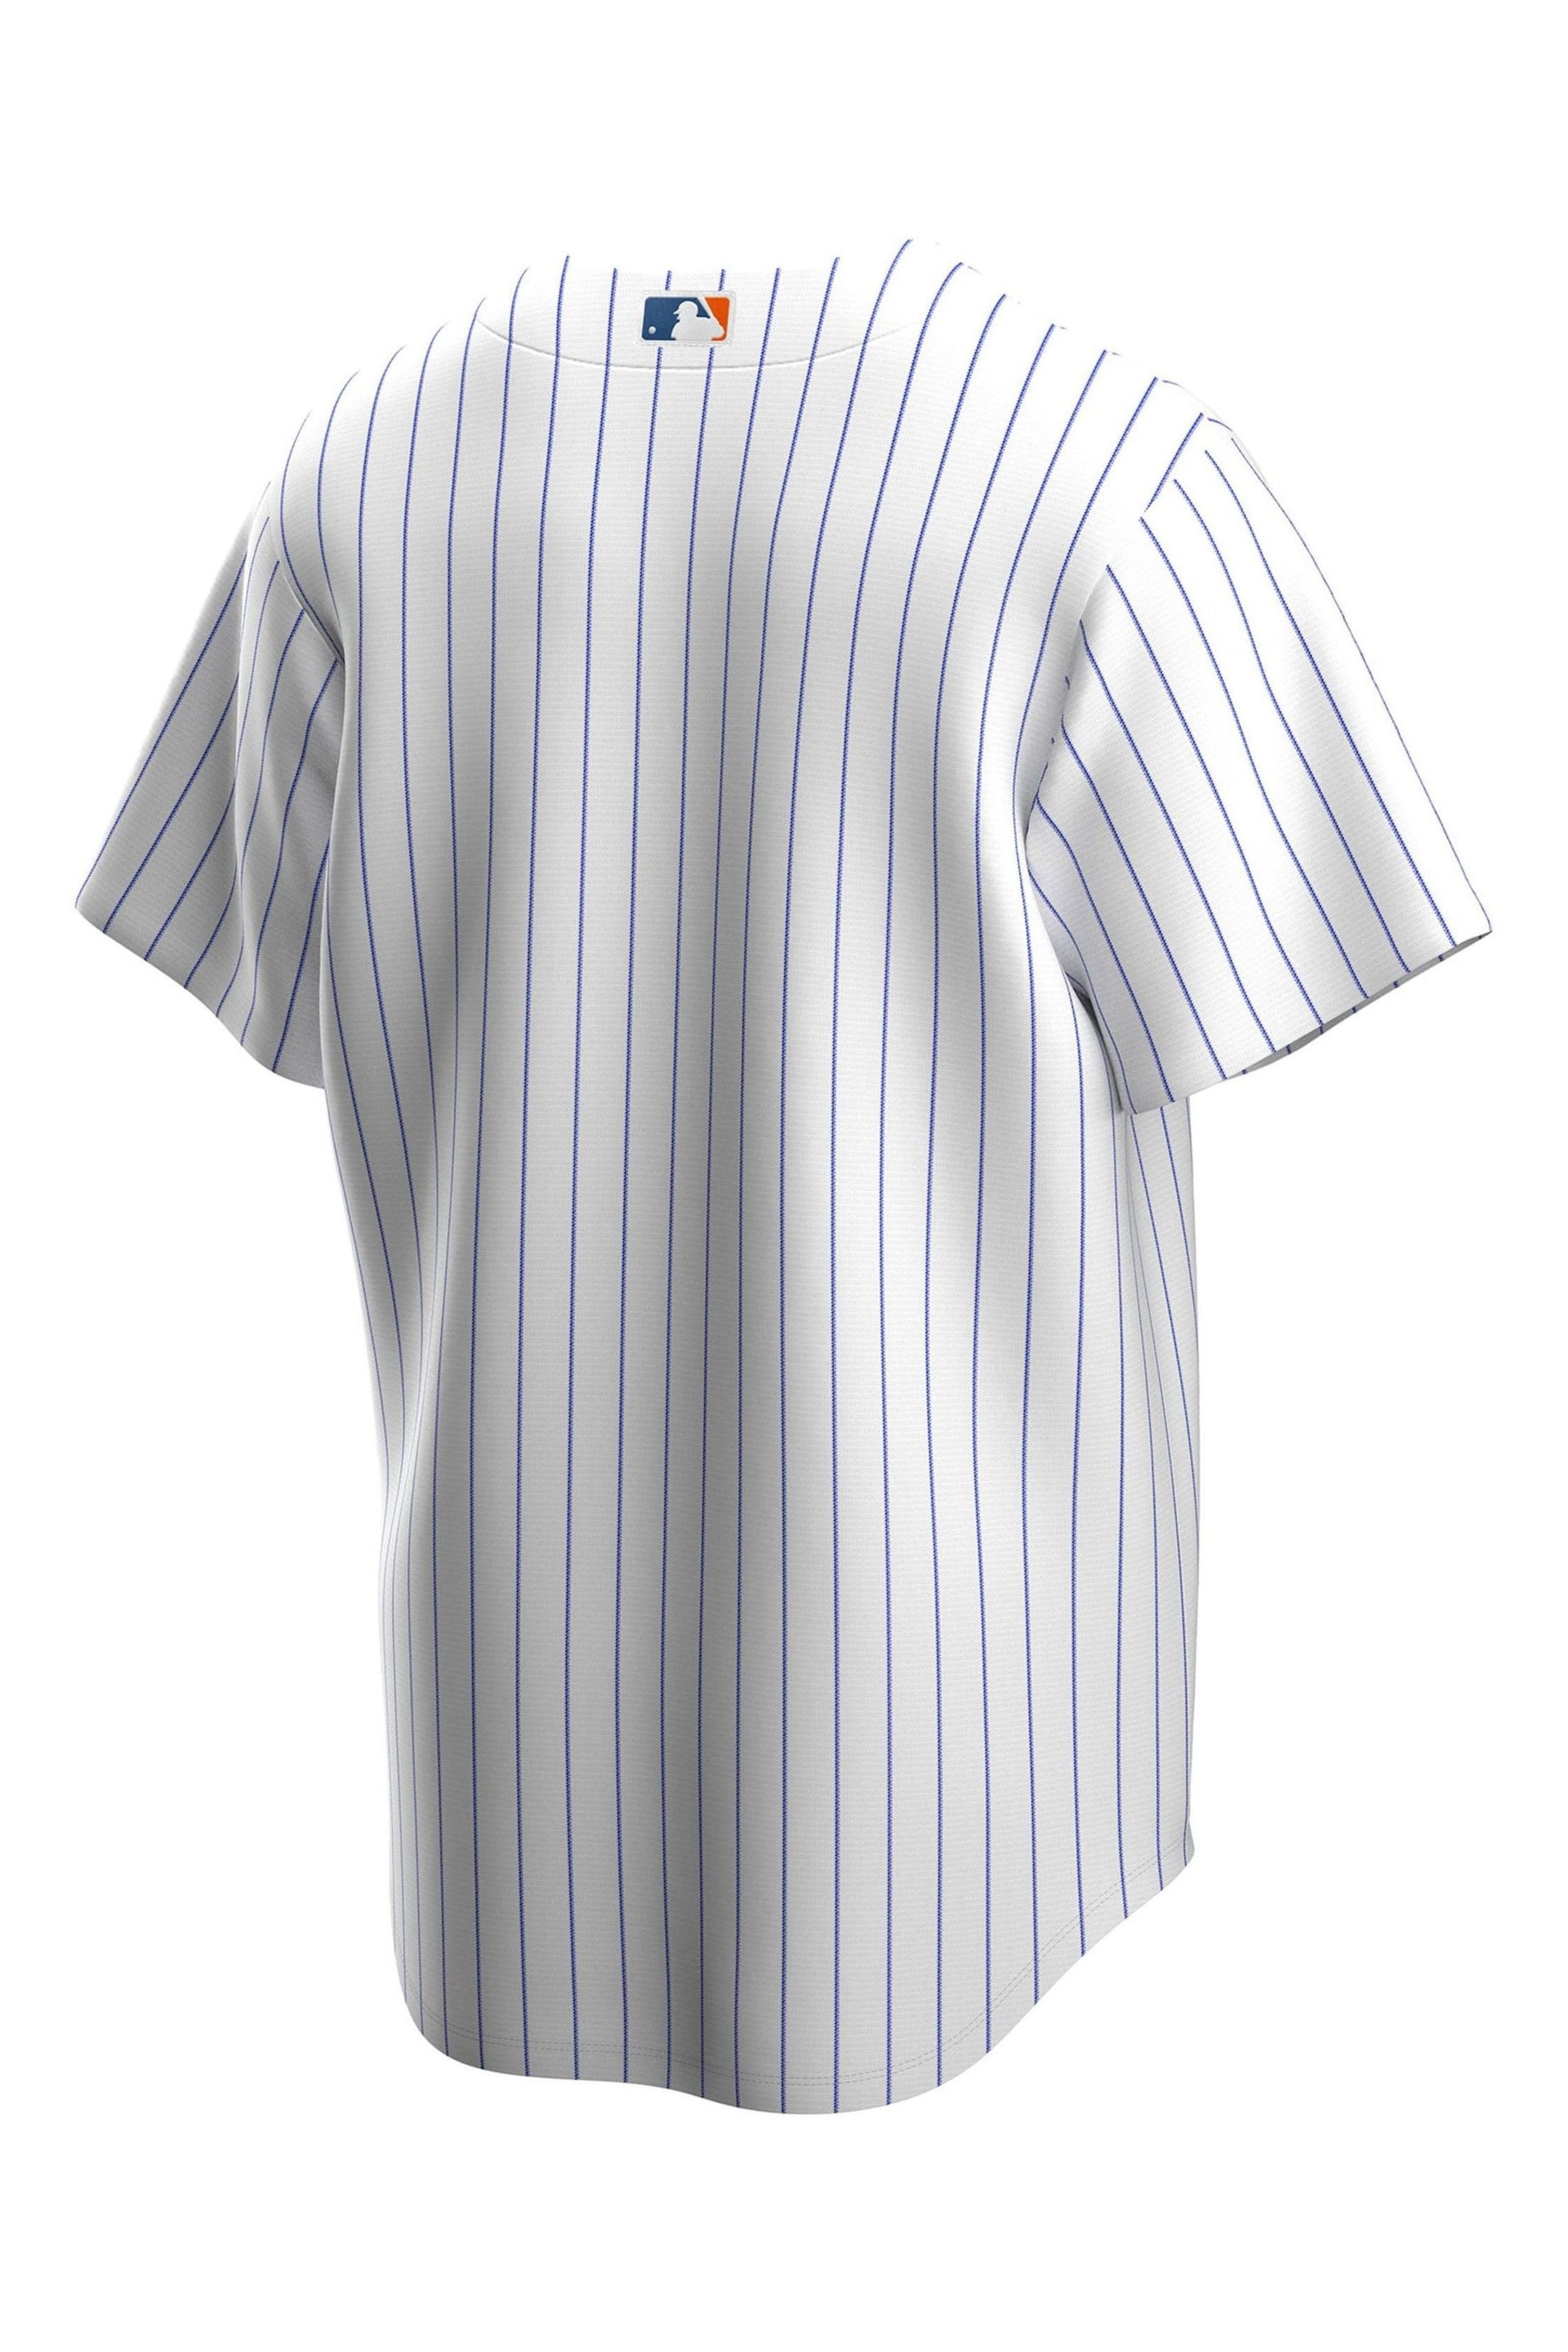 Nike White New York Mets Official Replica Home Jersey Youth - Image 3 of 3